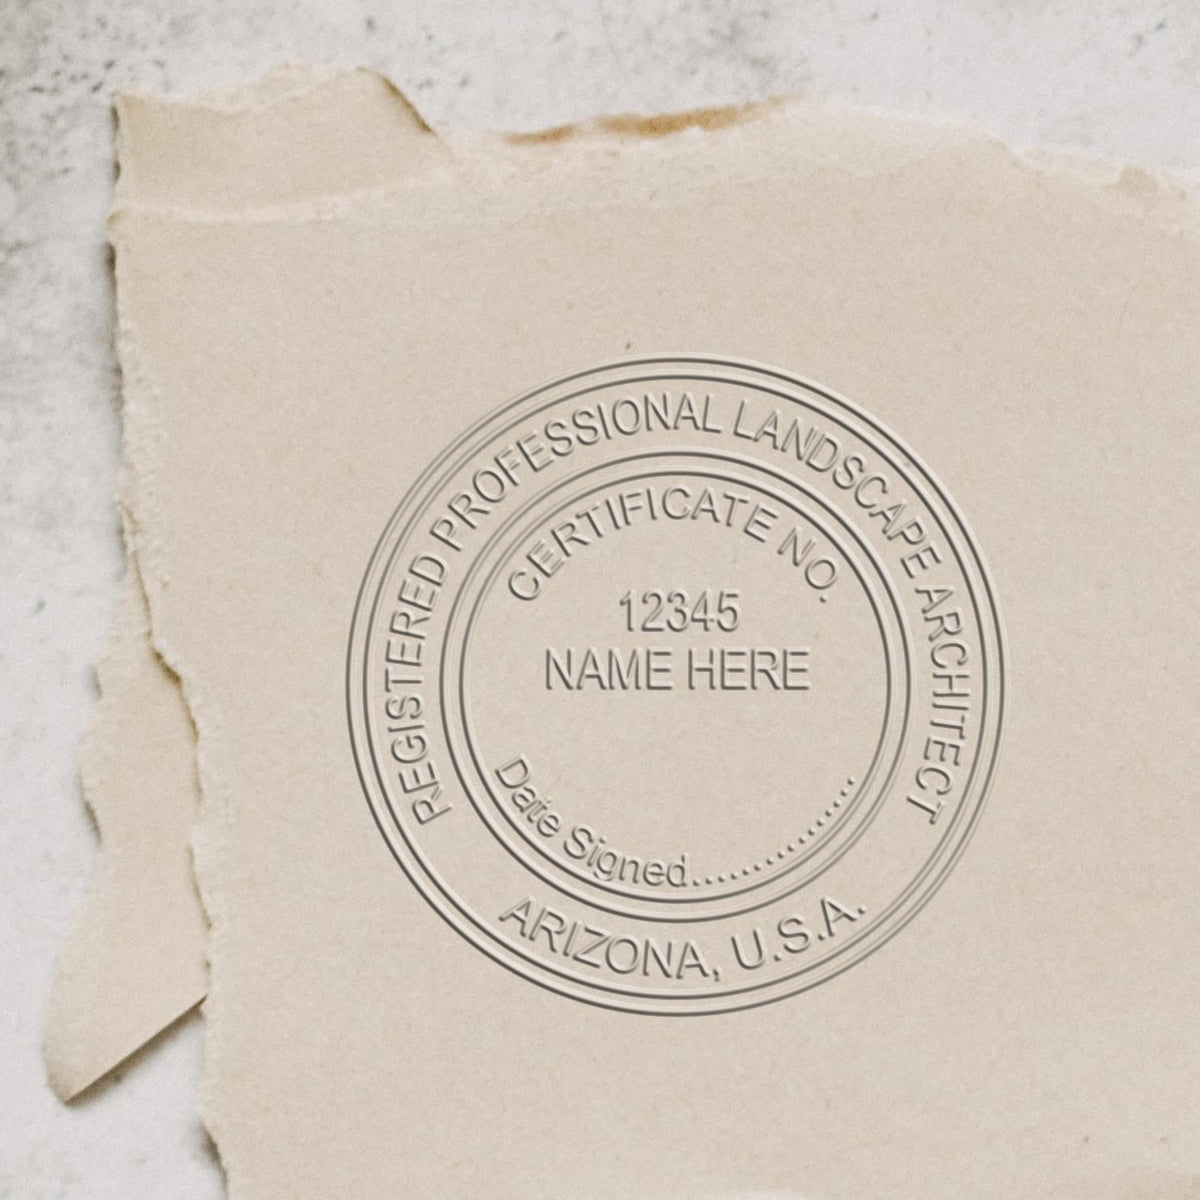 The Gift Arizona Landscape Architect Seal stamp impression comes to life with a crisp, detailed image stamped on paper - showcasing true professional quality.